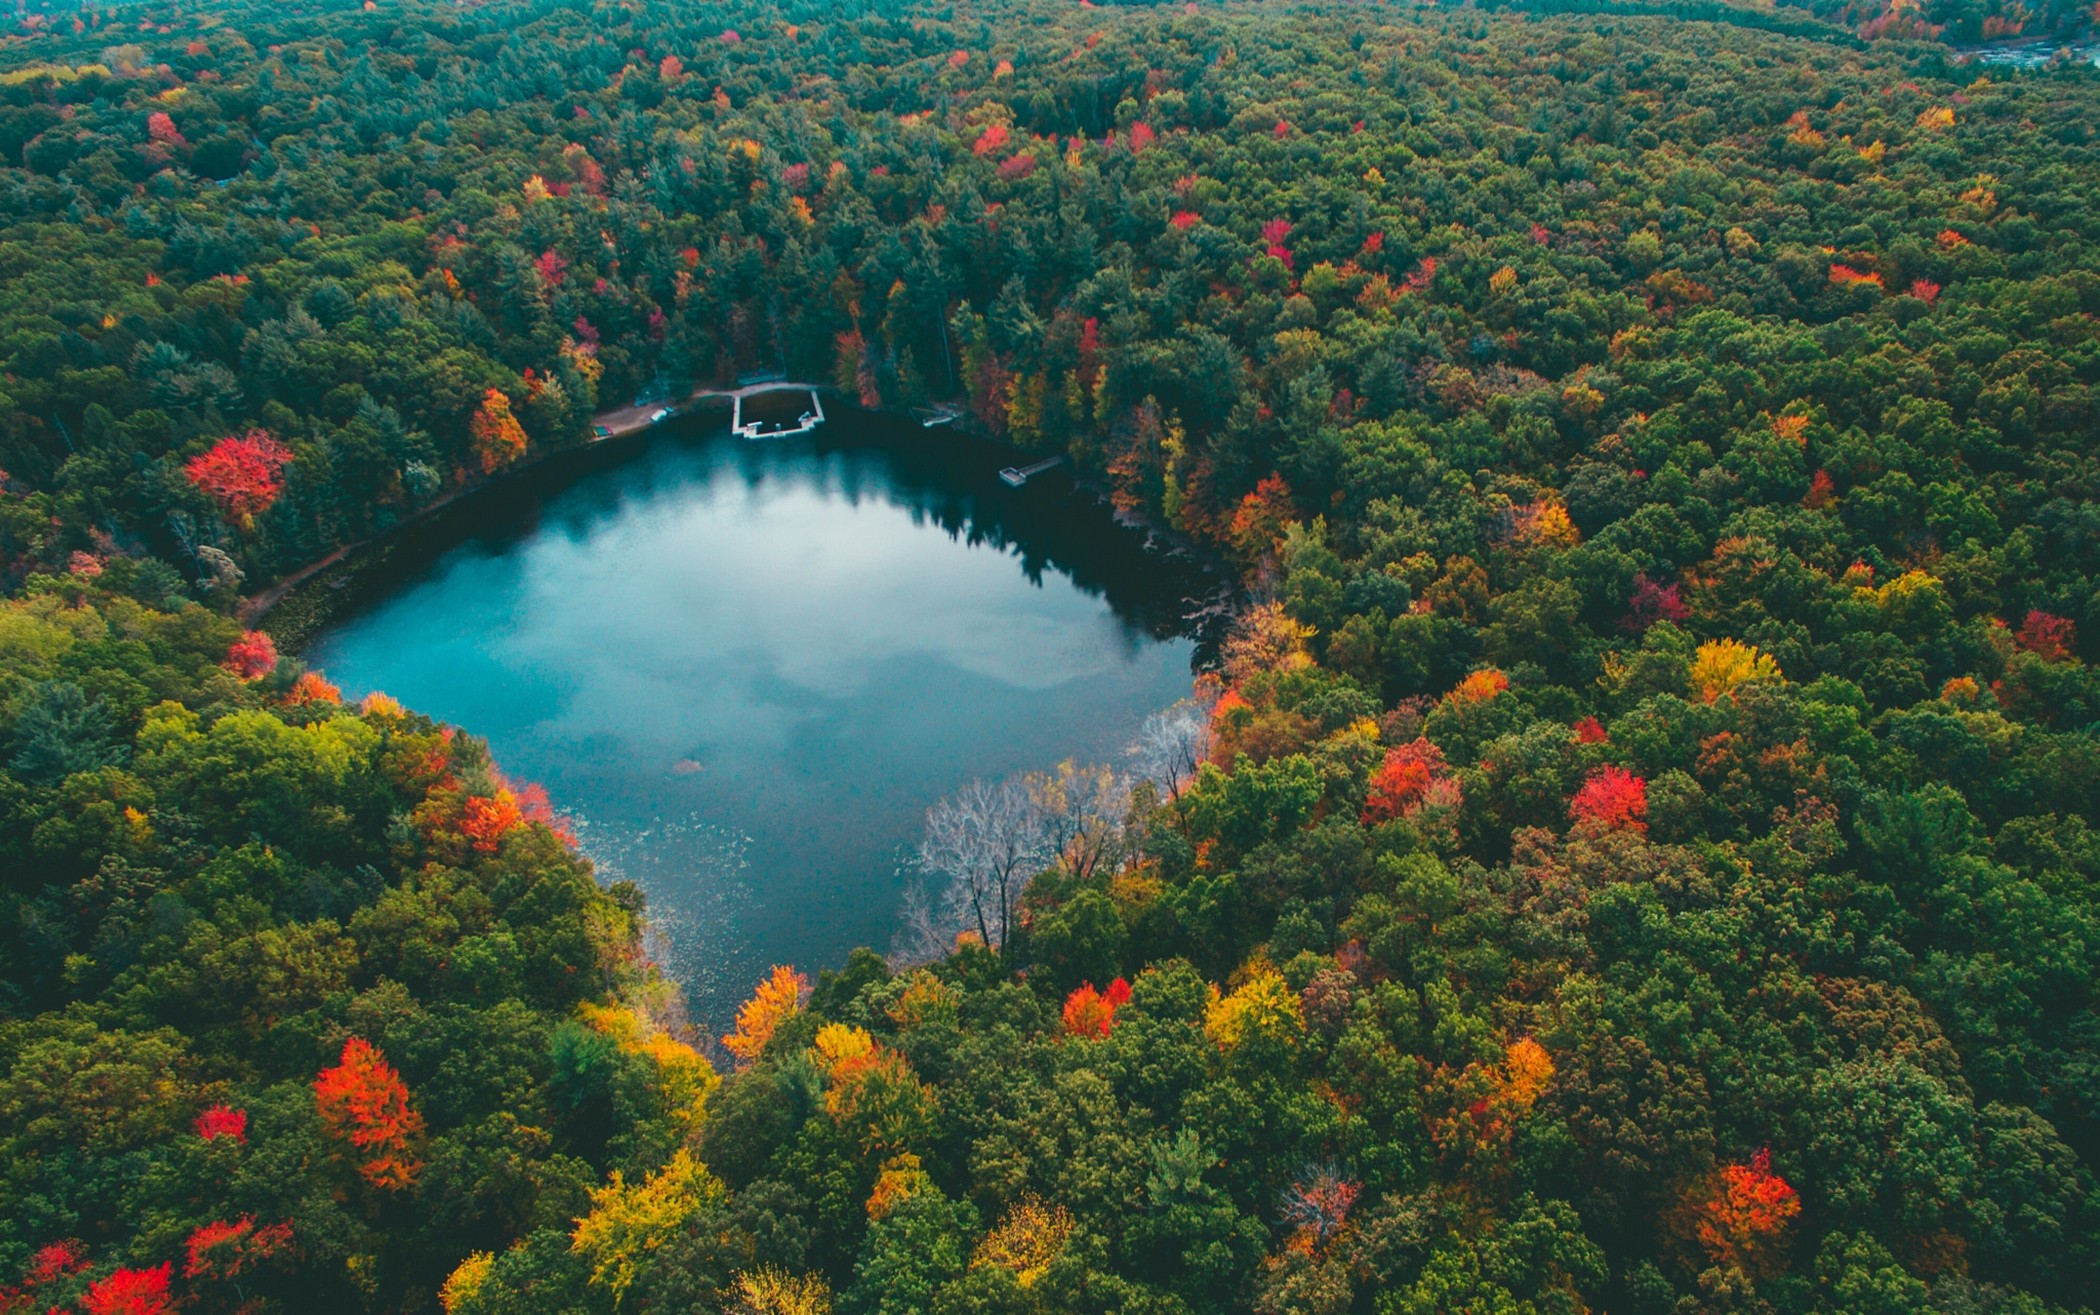 General 2100x1315 landscape nature forest lake colorful fall trees water blue red yellow green aerial view